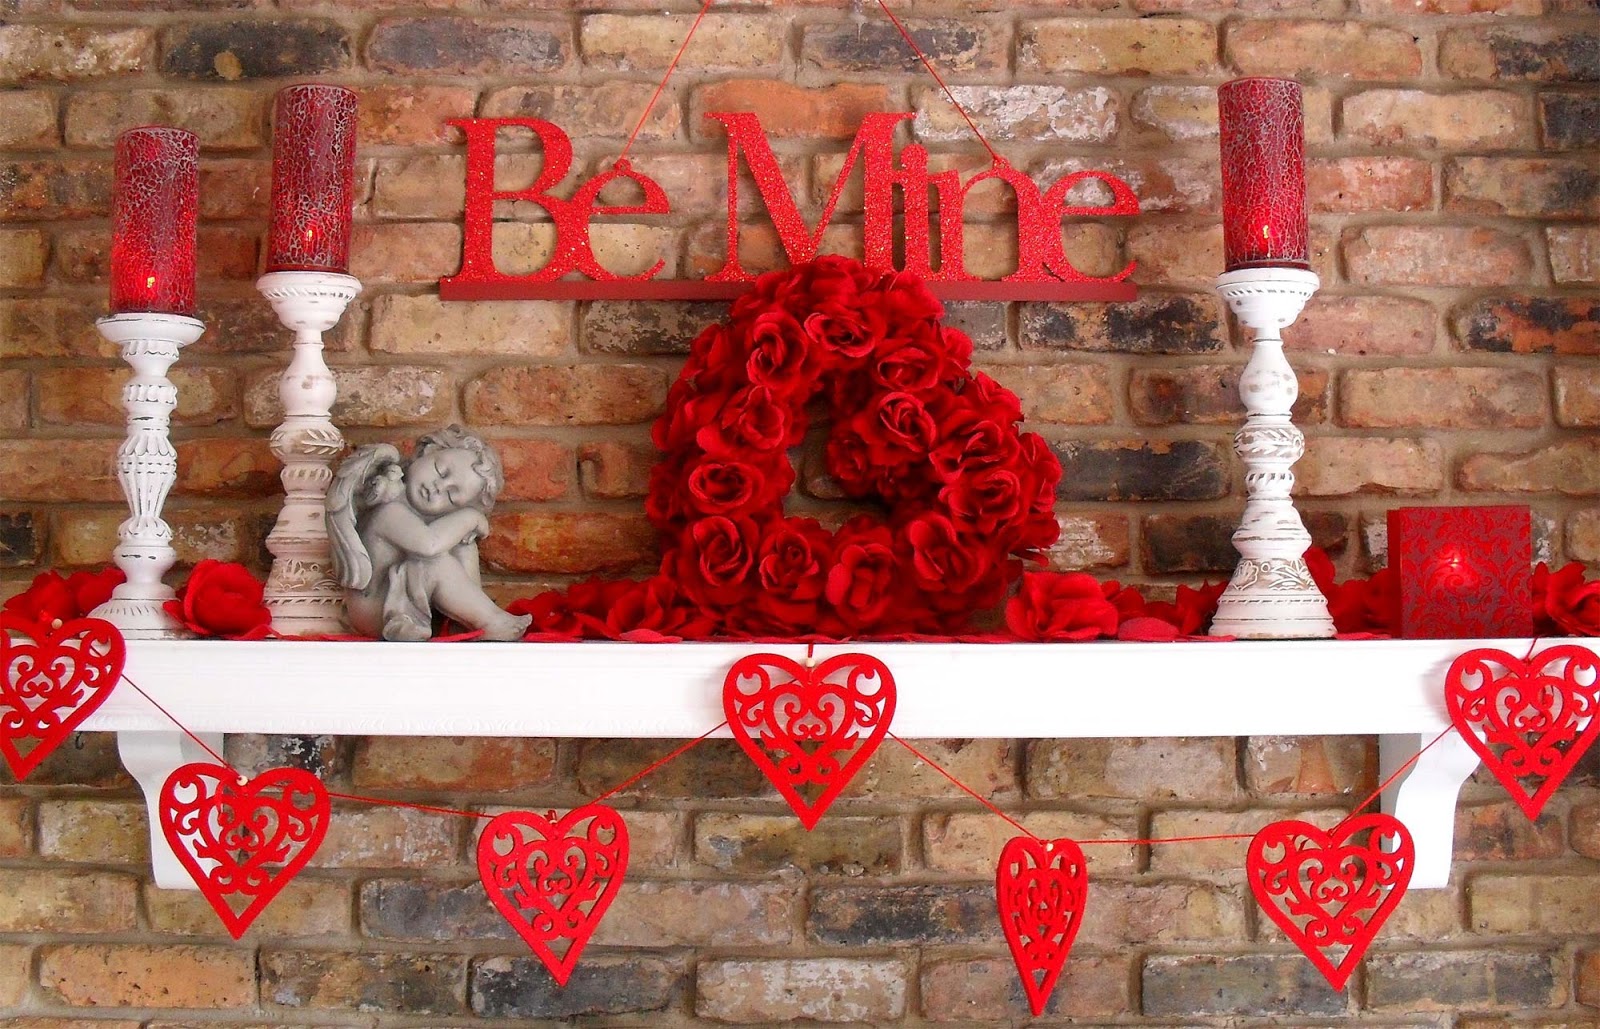 valentine's day decorations ideas 2013 to decorate bedroom,office and